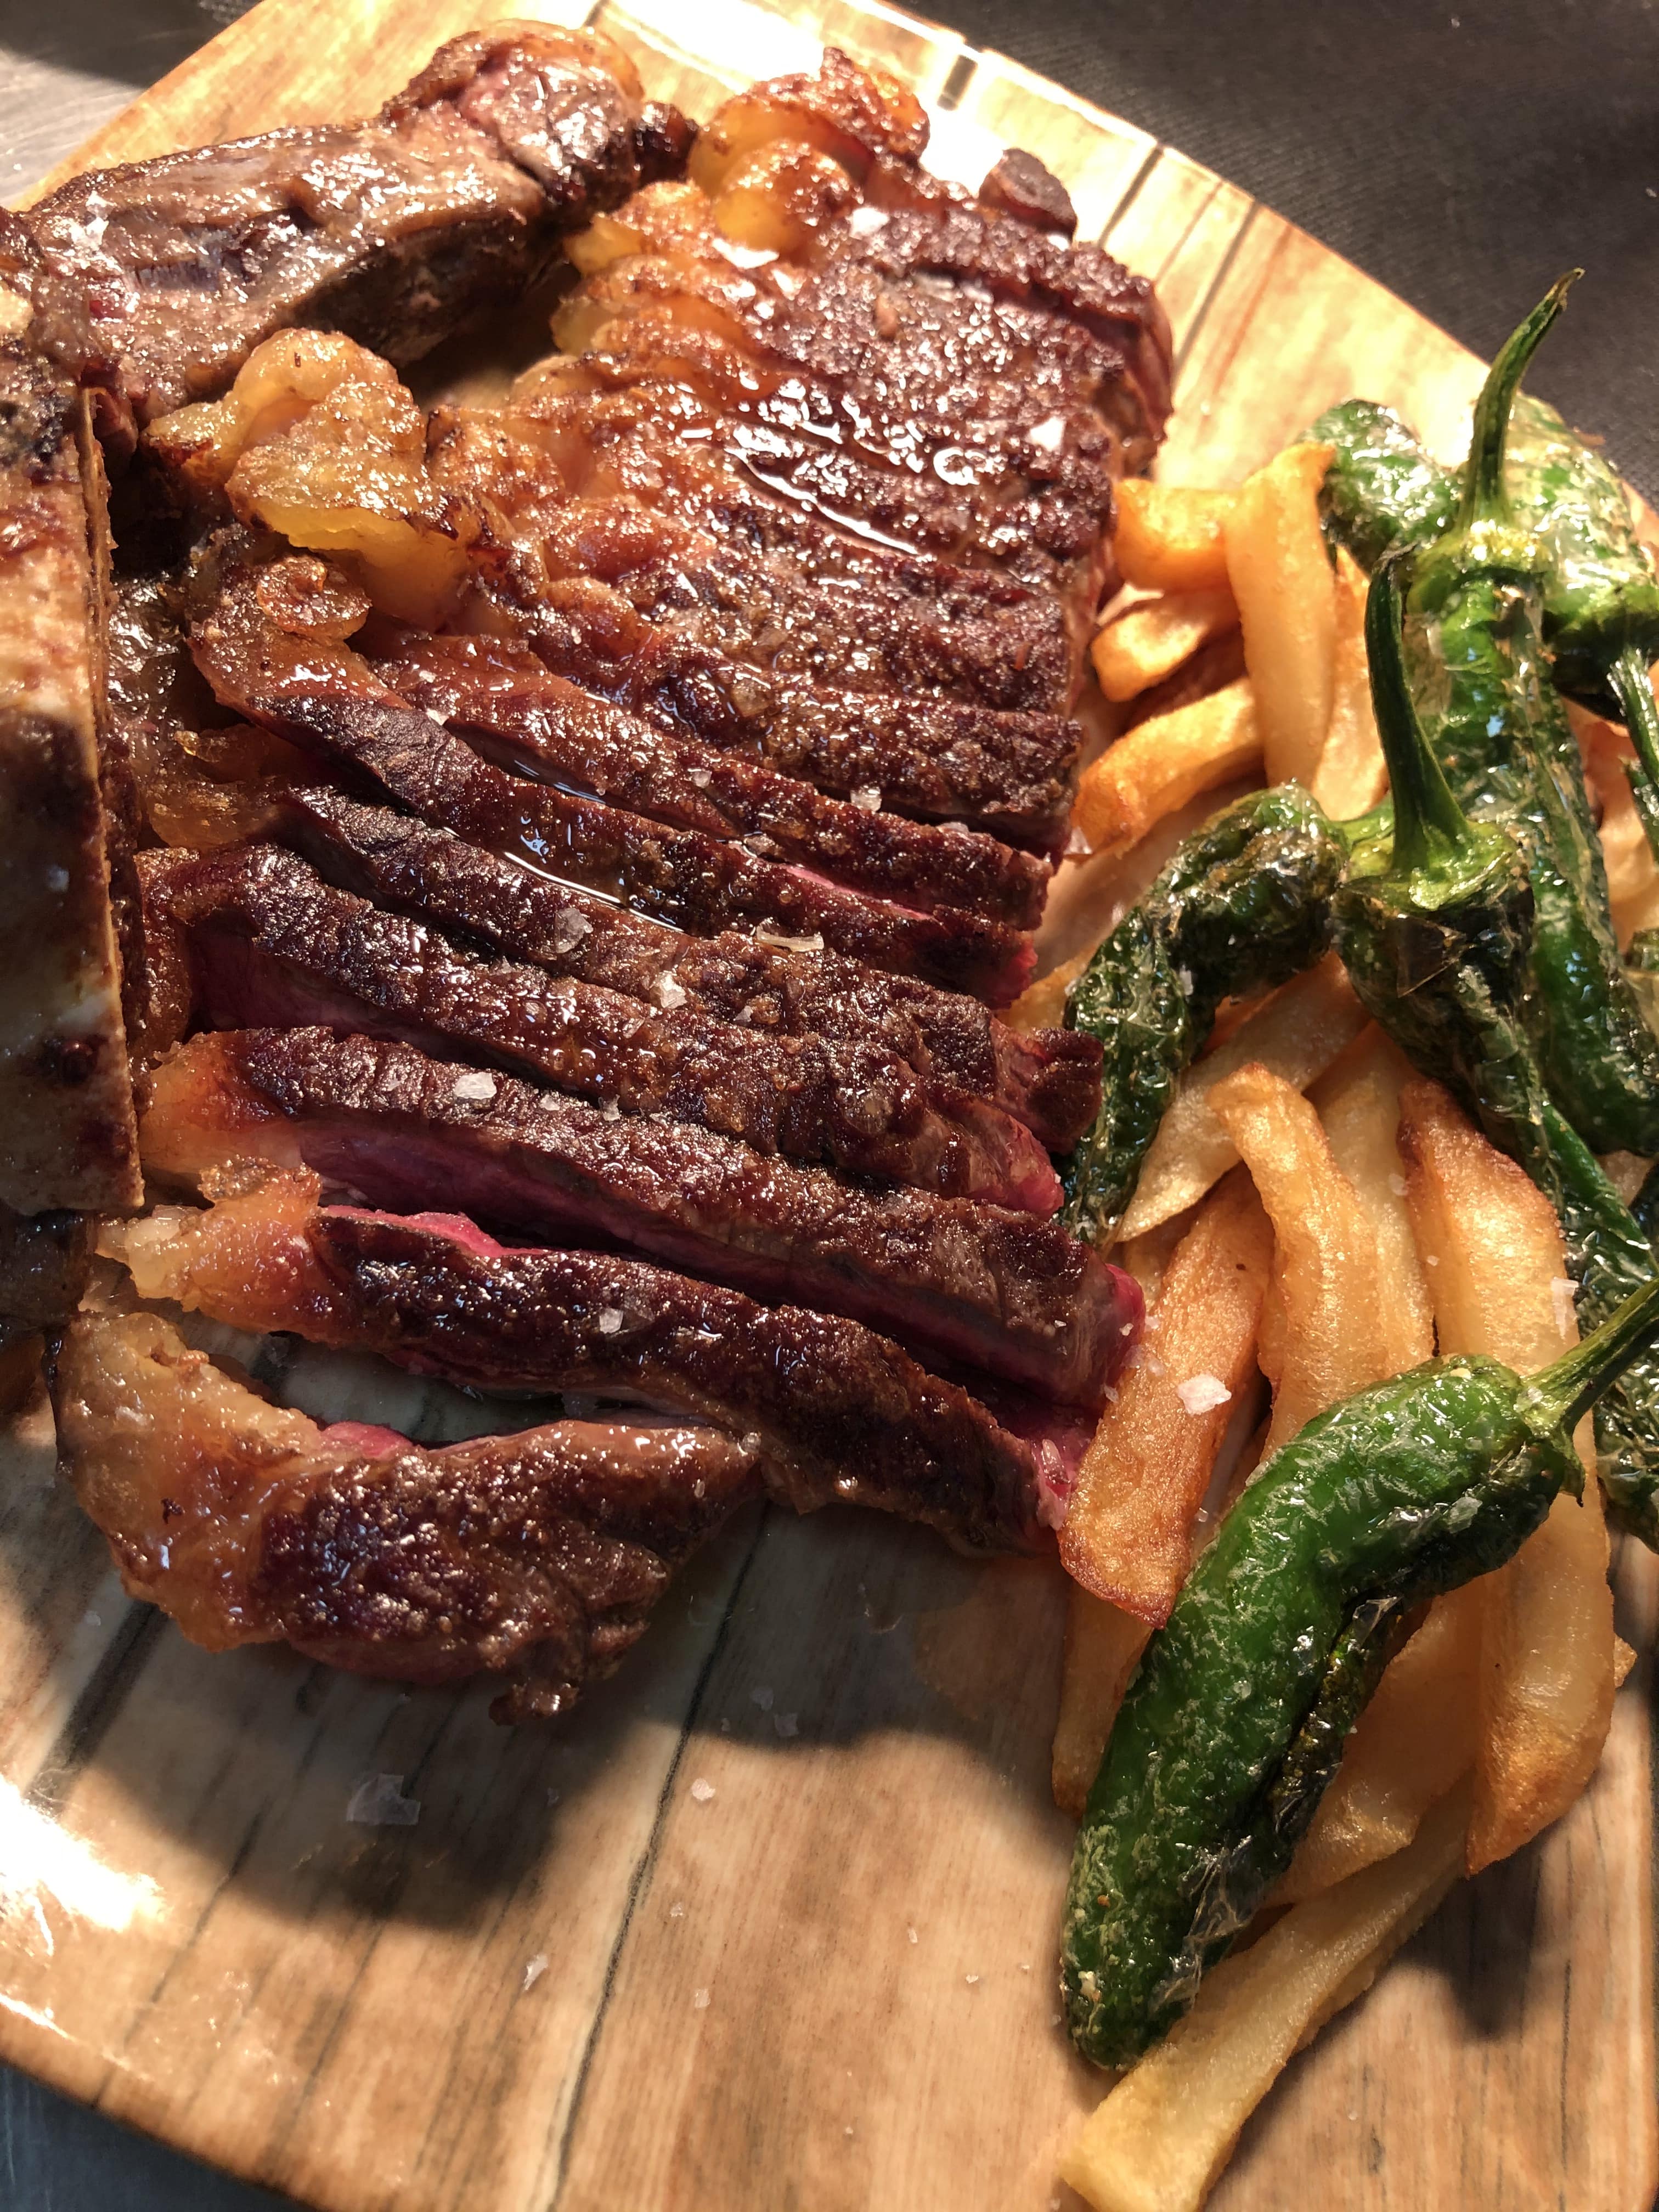 Matured steak "Txogitxu" with traditional potatoes and padrón peppers